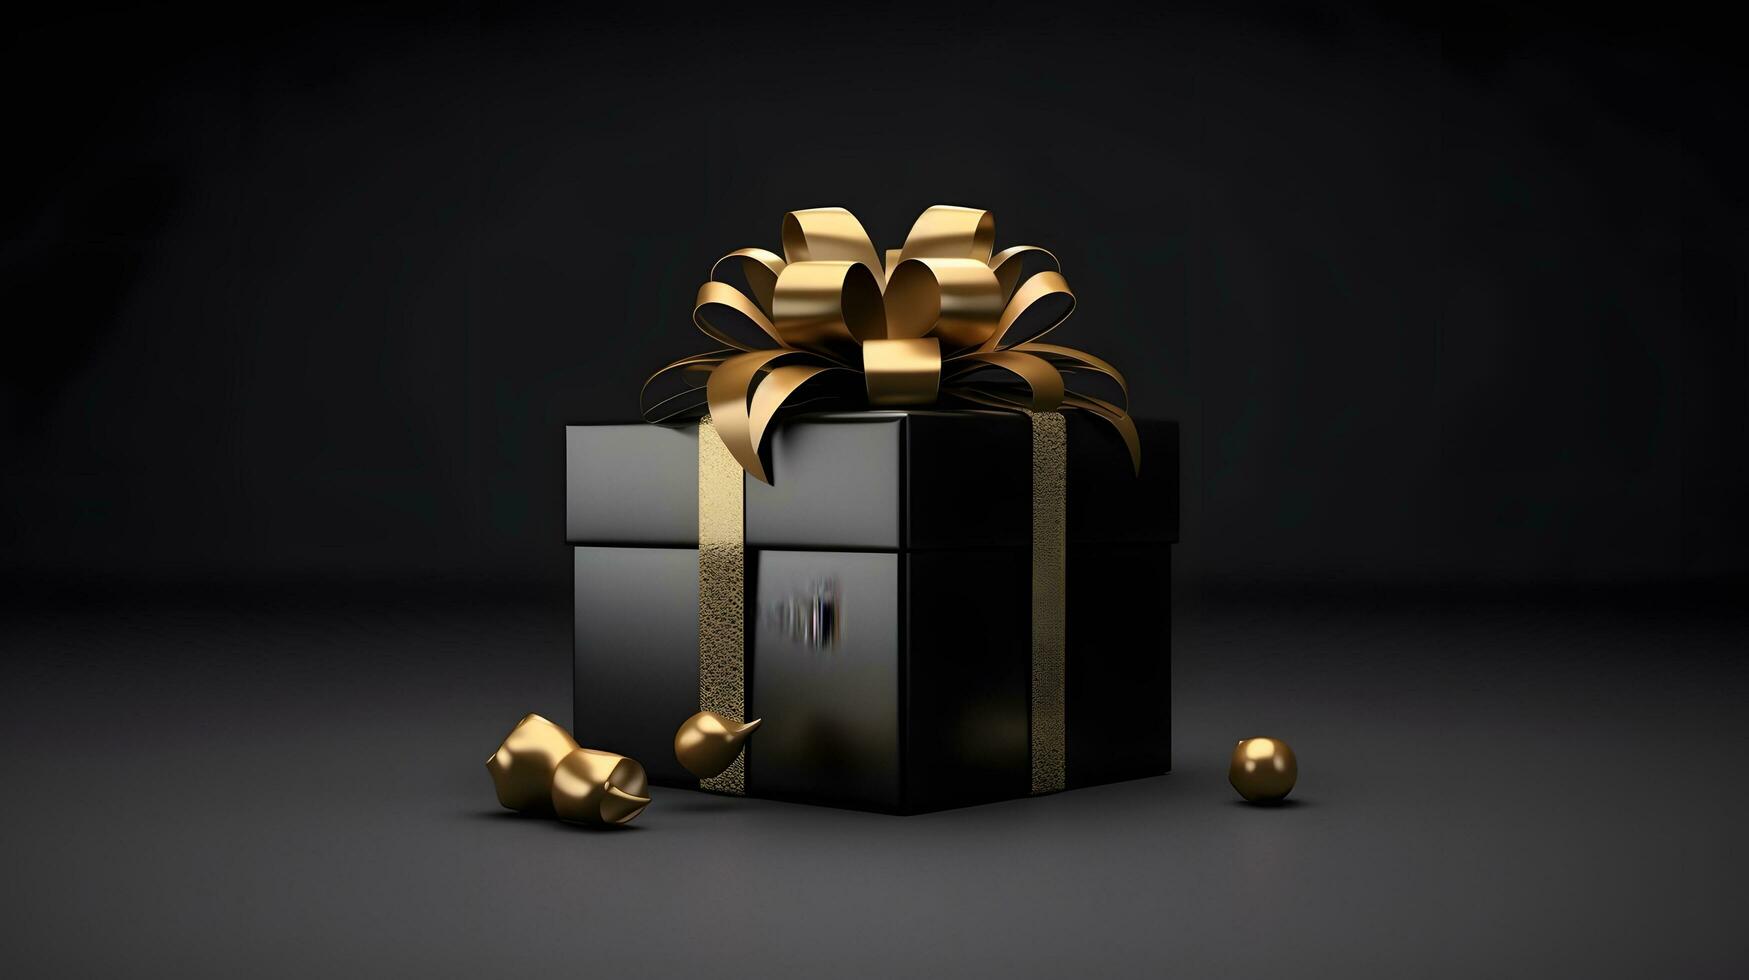 Black and Gold Gift Box, A Luxurious and Elegant Present photo